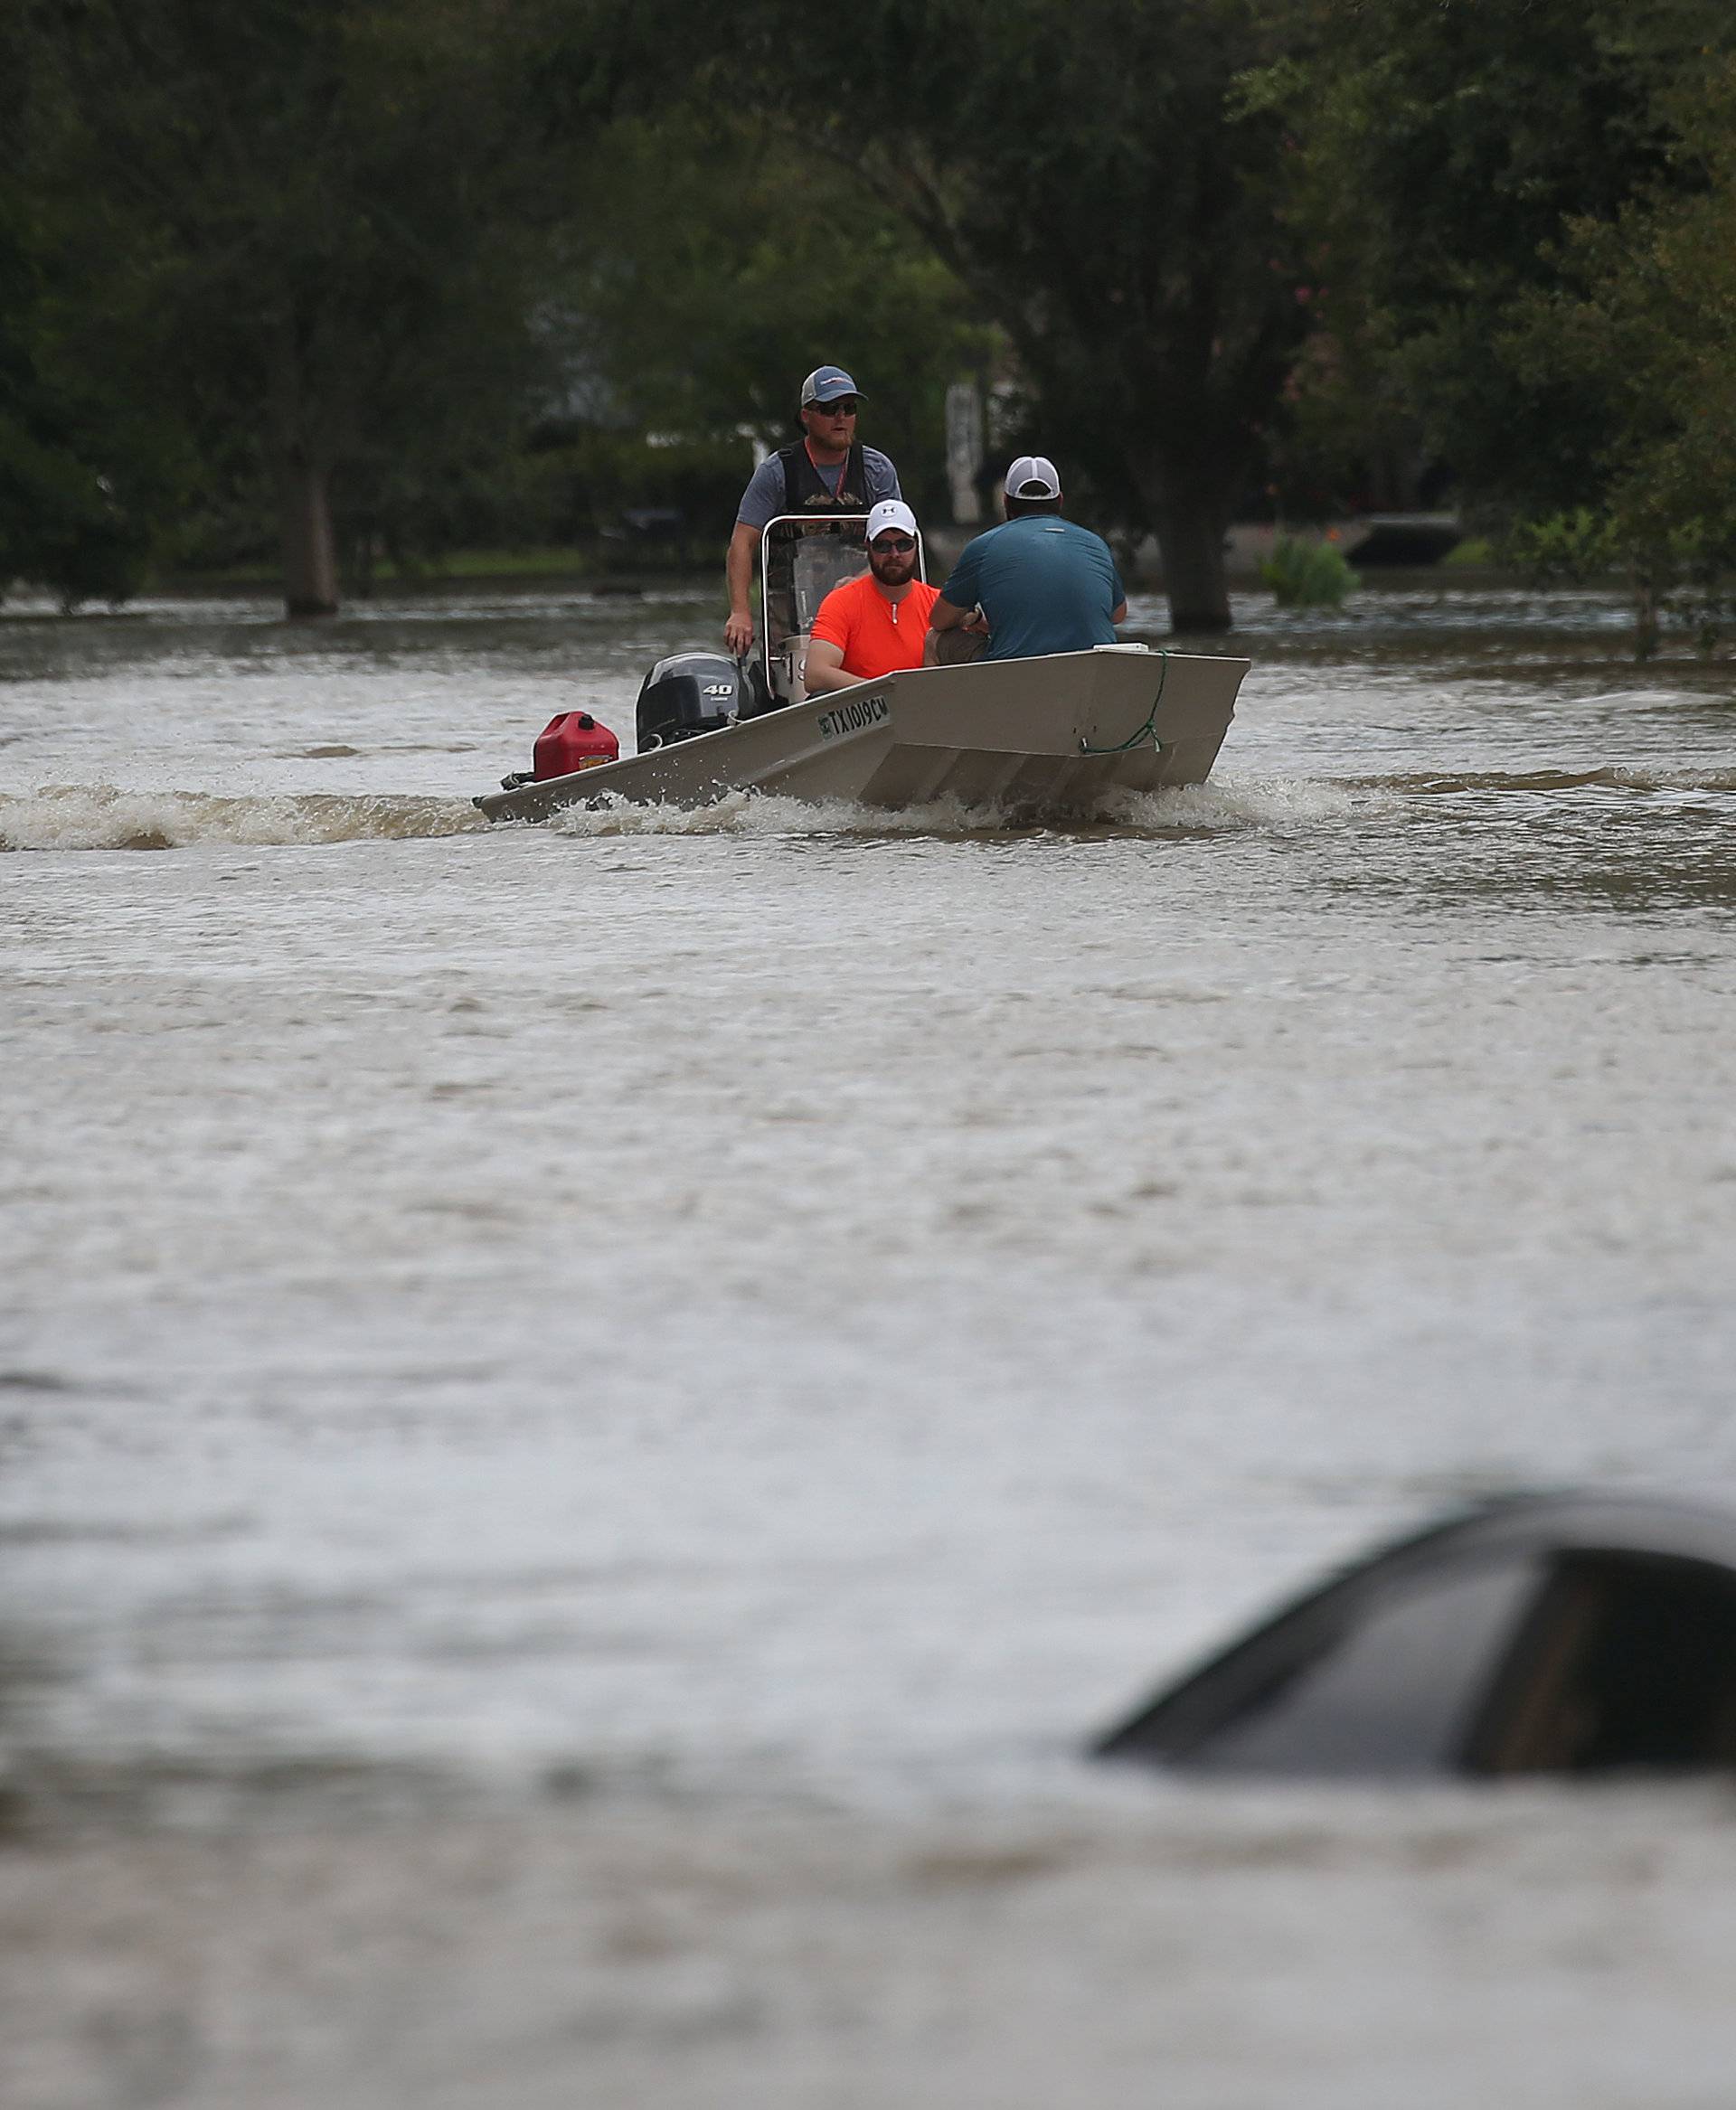 A rescue boat evacuates people from the rising waters of Buffalo Bayou following Hurricane Harvey in a neighborhood west of Houston